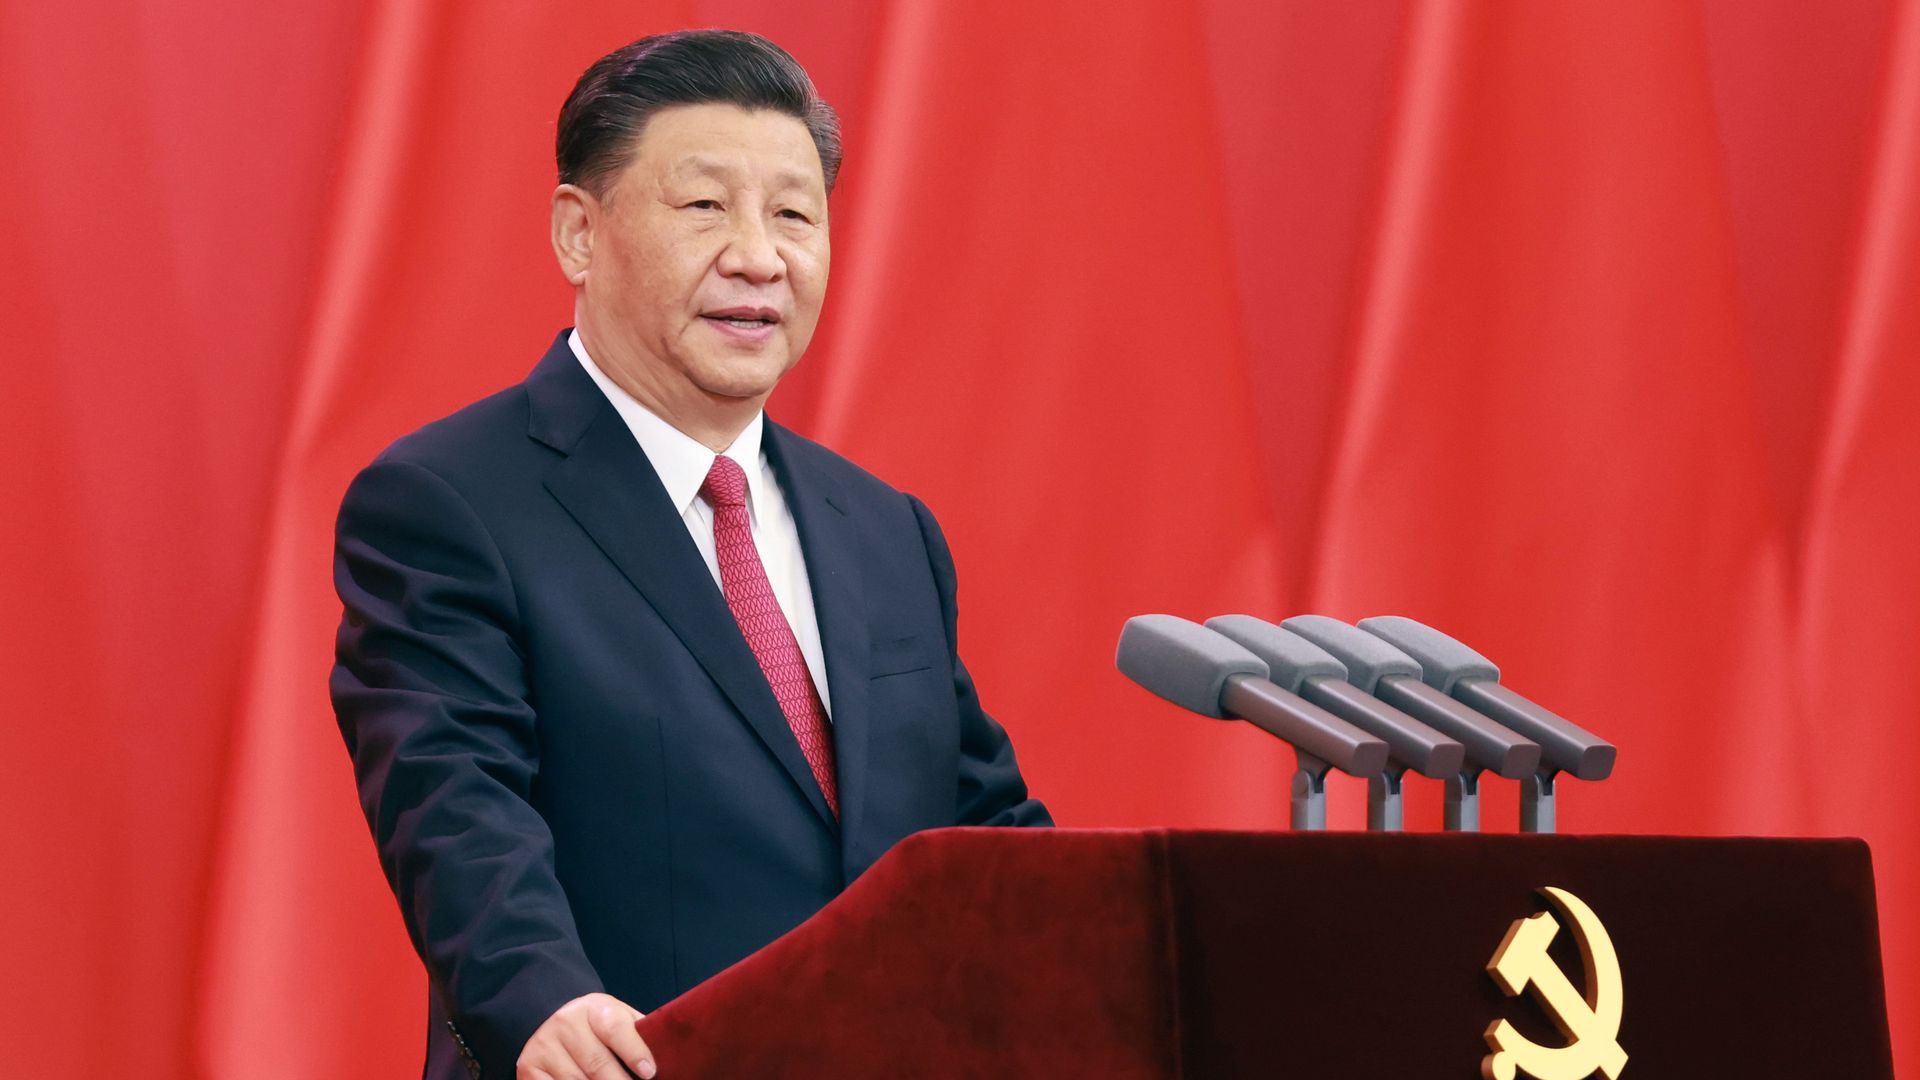 China's President Xi Jinping speaking during a Chinese Communist Party meeting in Beijing in June 2021.